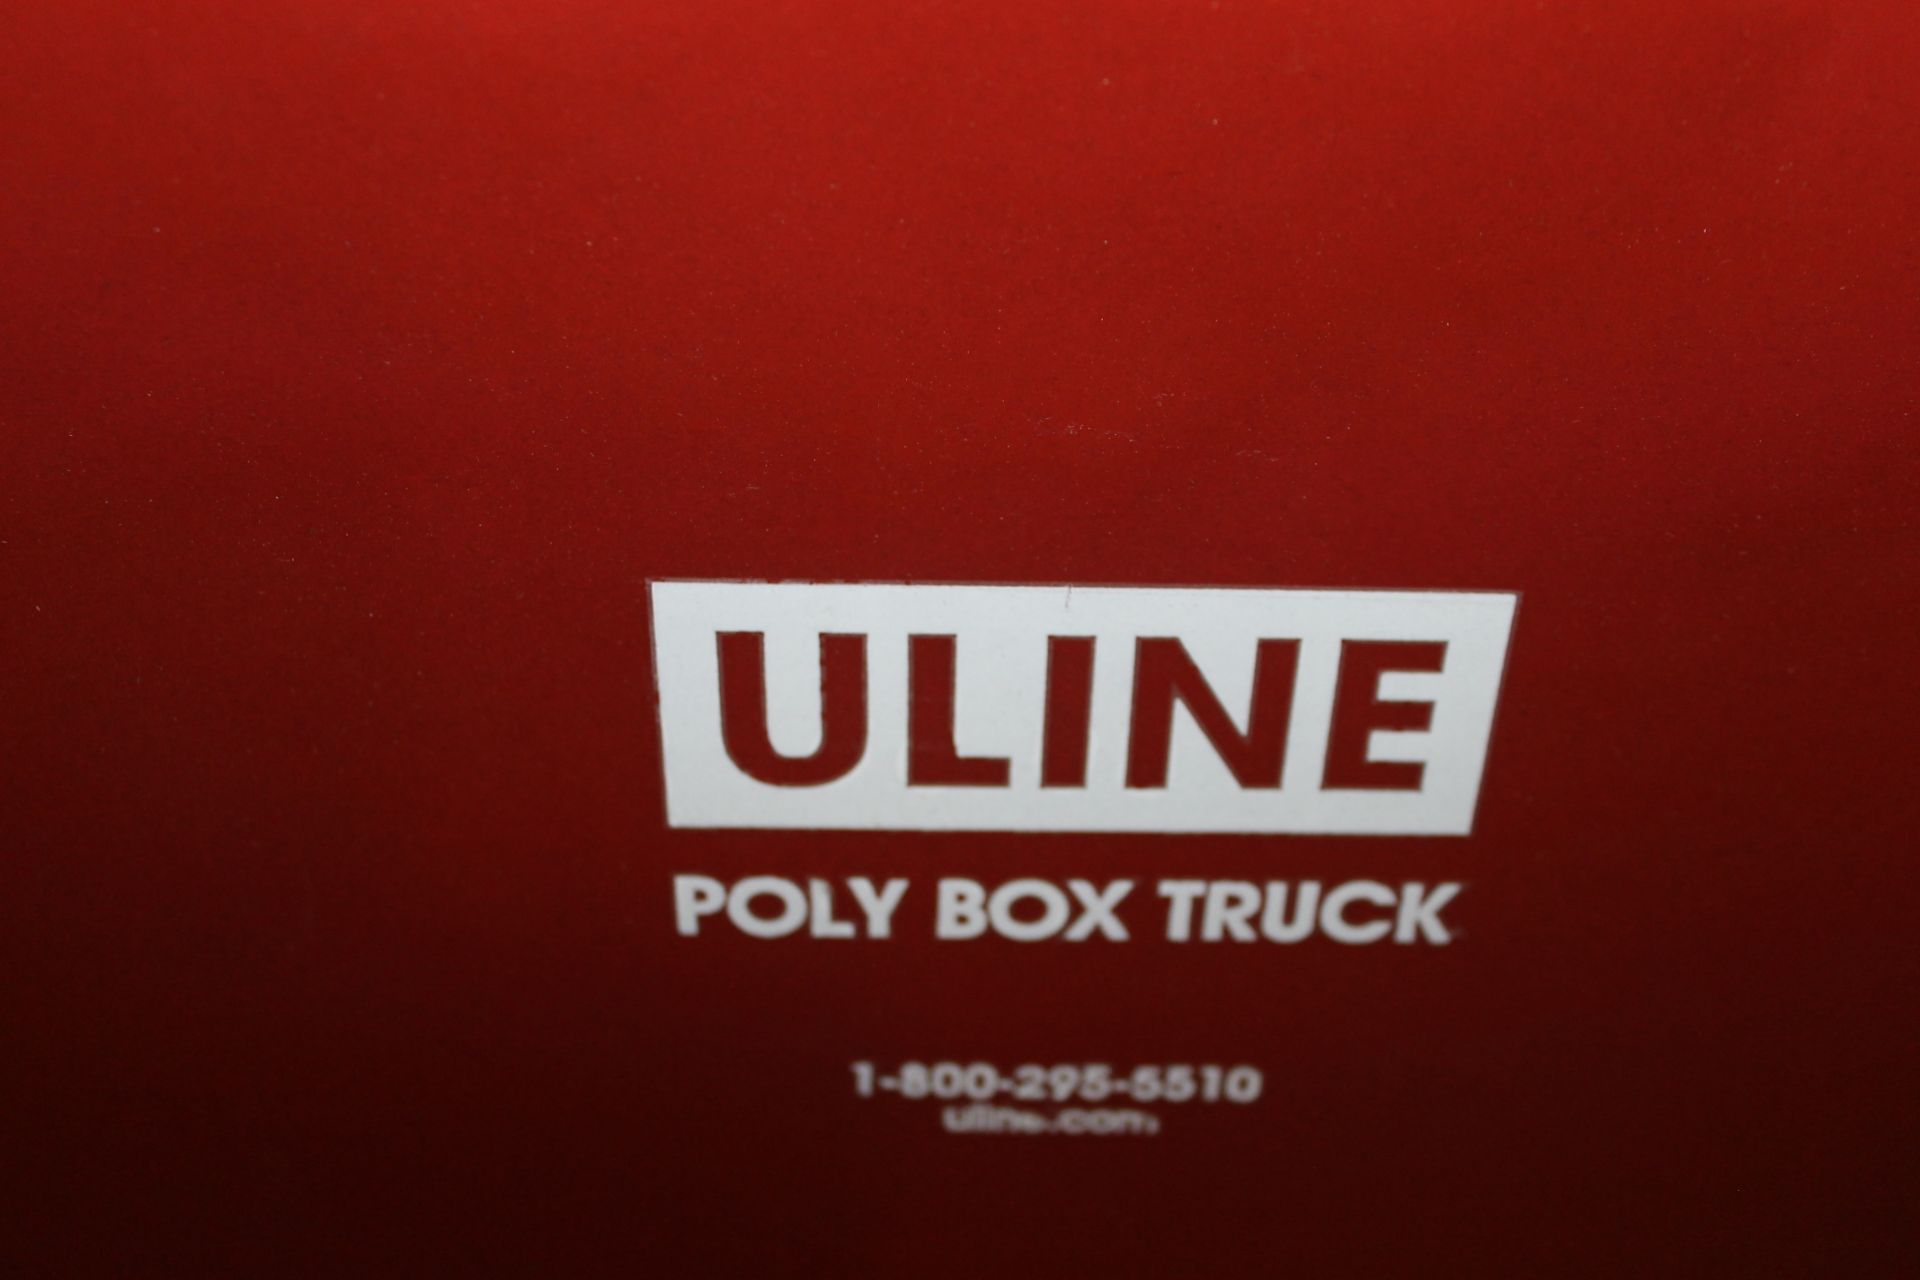 ULINE POLY BOX TRUCK - Image 2 of 2